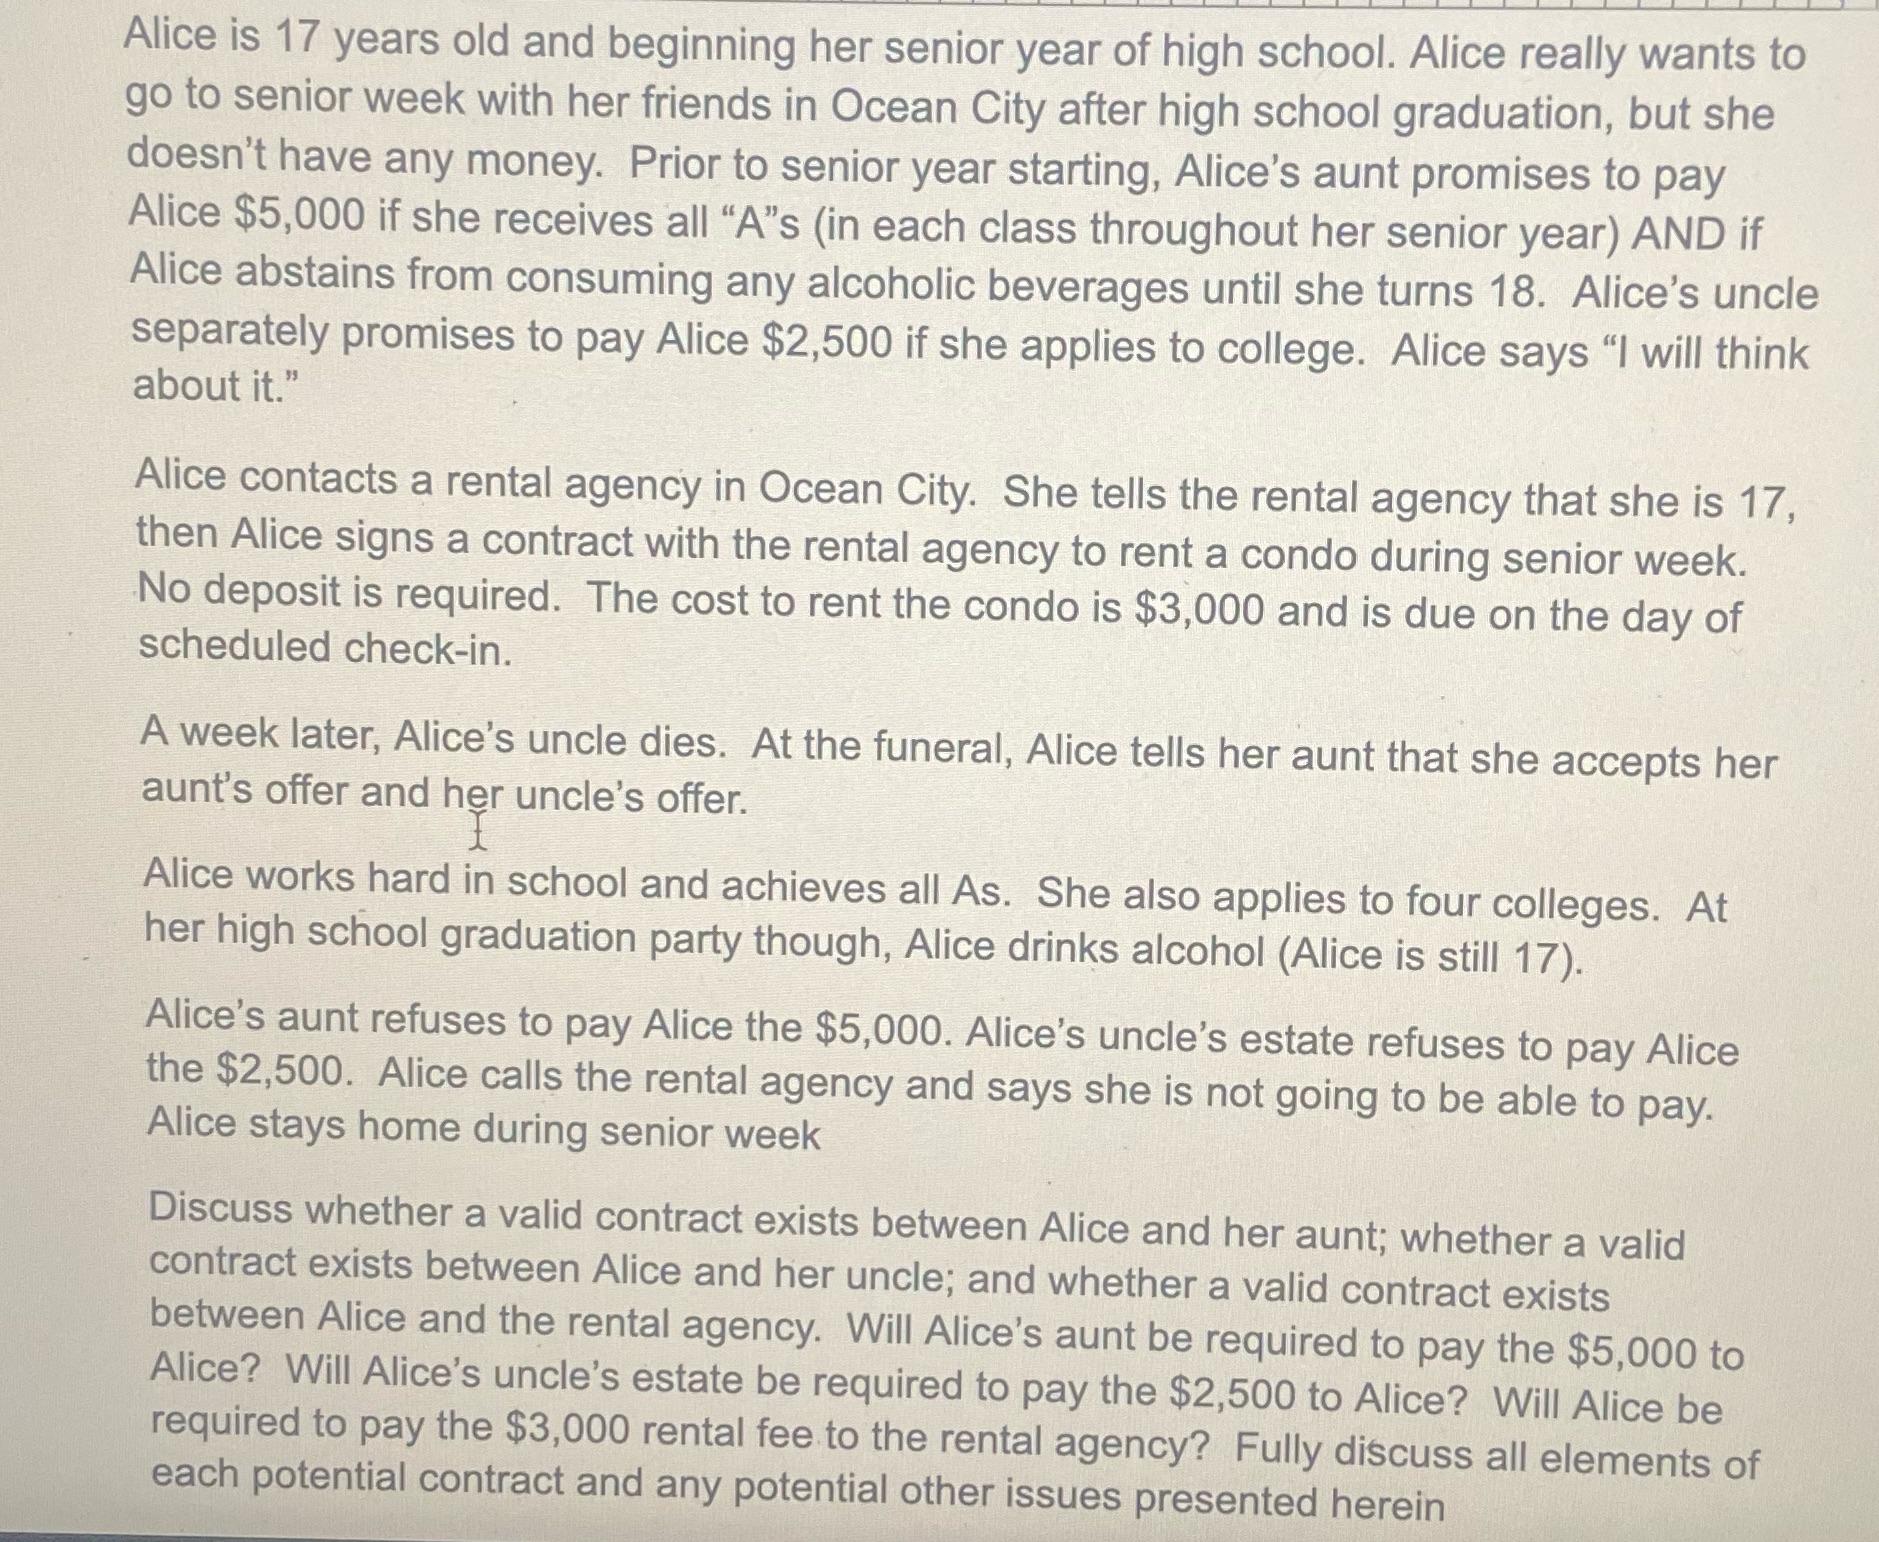 Alice is 17 years old and beginning her senior year of high school. Alice really wants to go to senior week